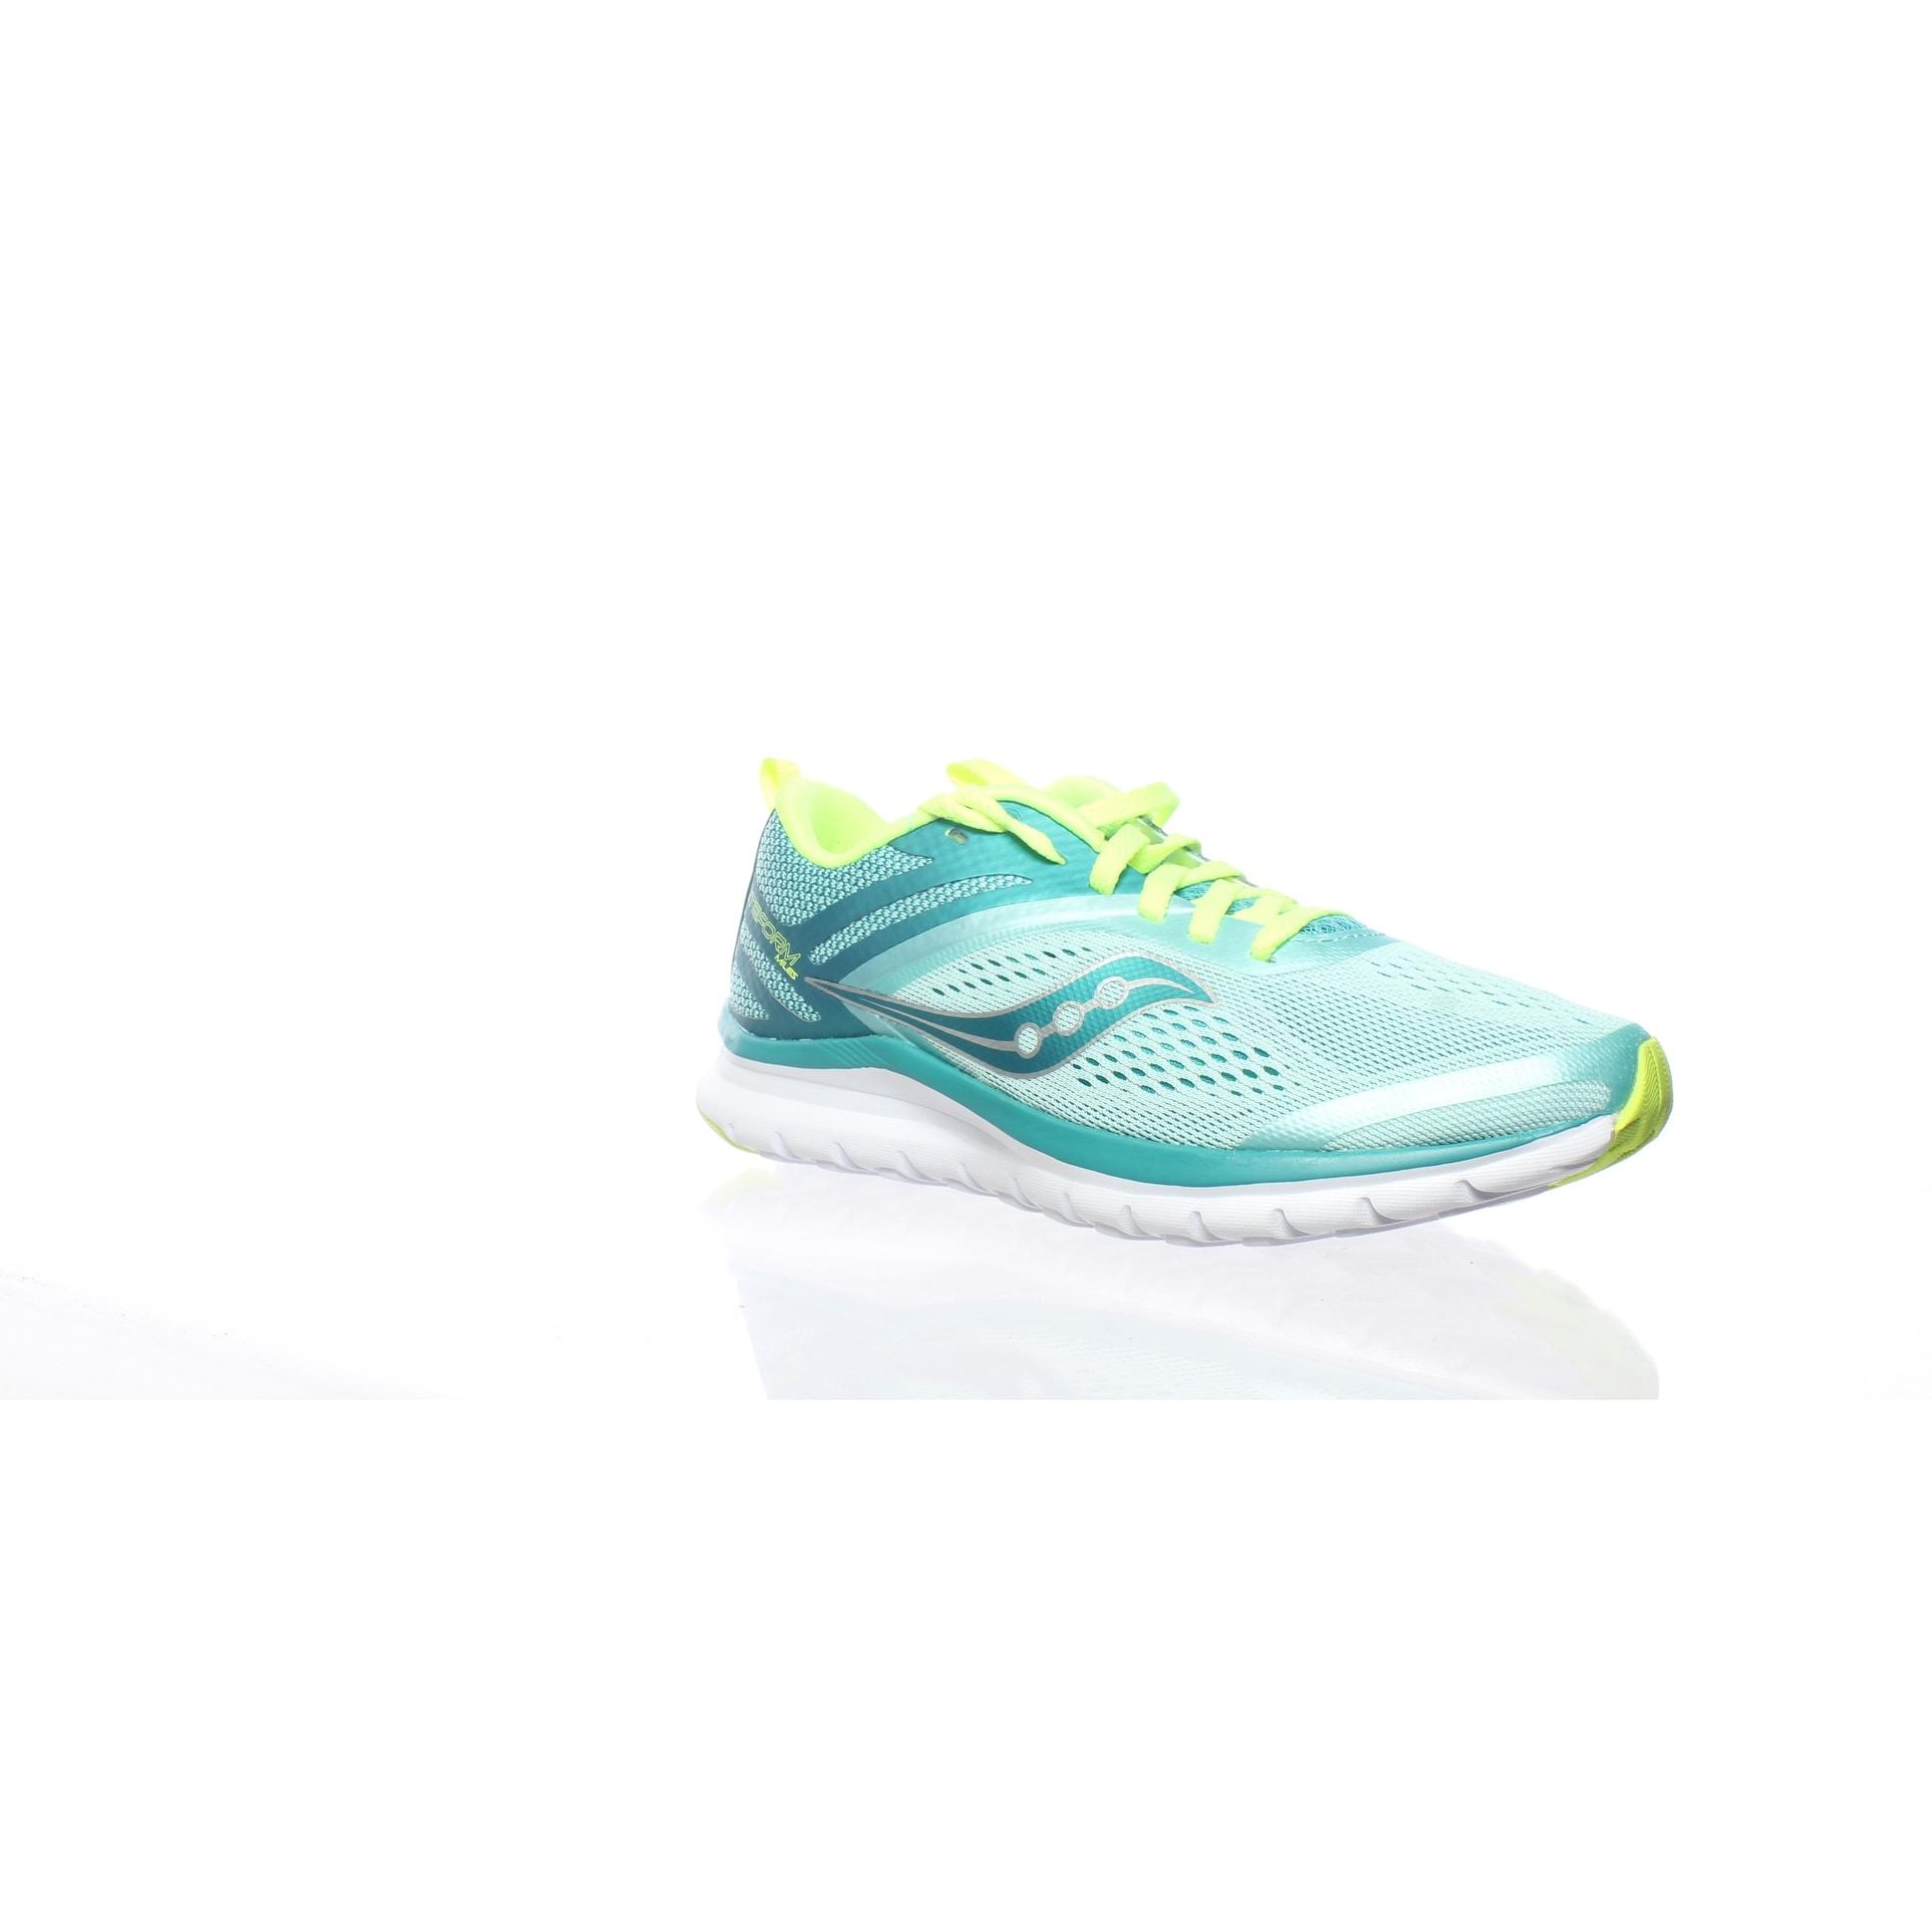 Teal Citron Running Shoes Size 5.5 